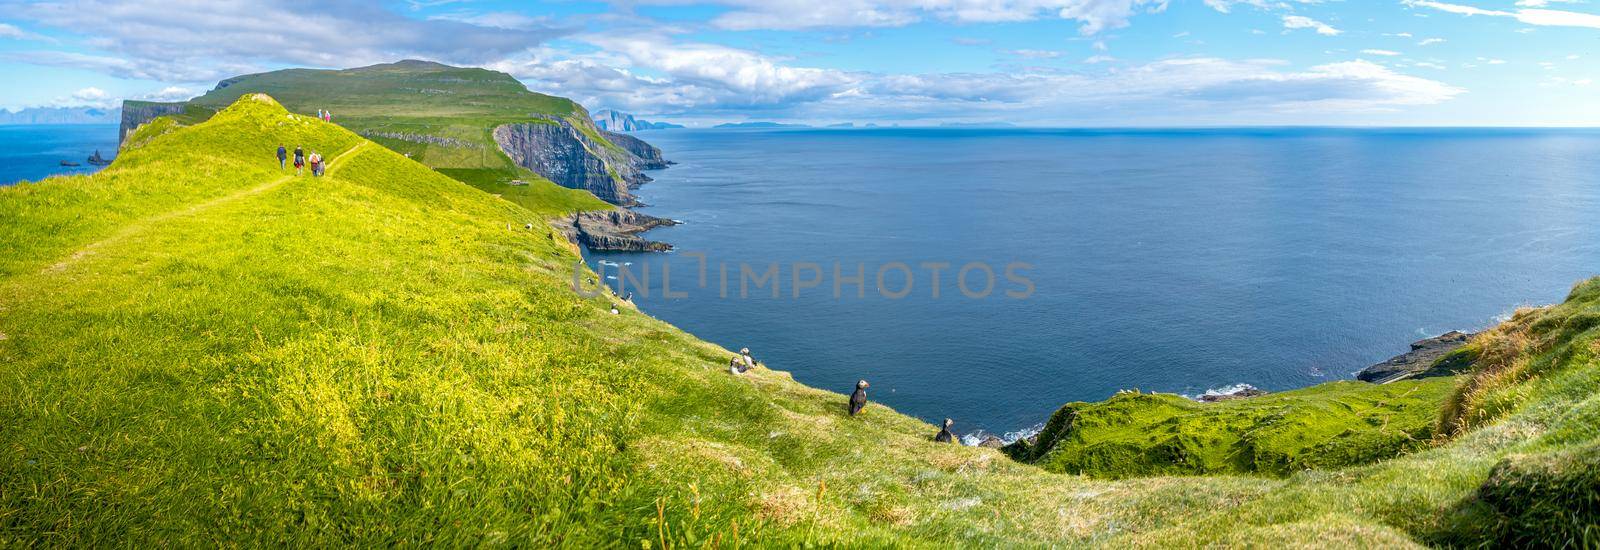 Panoramic view over mythical Faroe Island Mykines in the middle of Atlantic Ocean with a lot of puffins, parrot like seabirds, and hikers